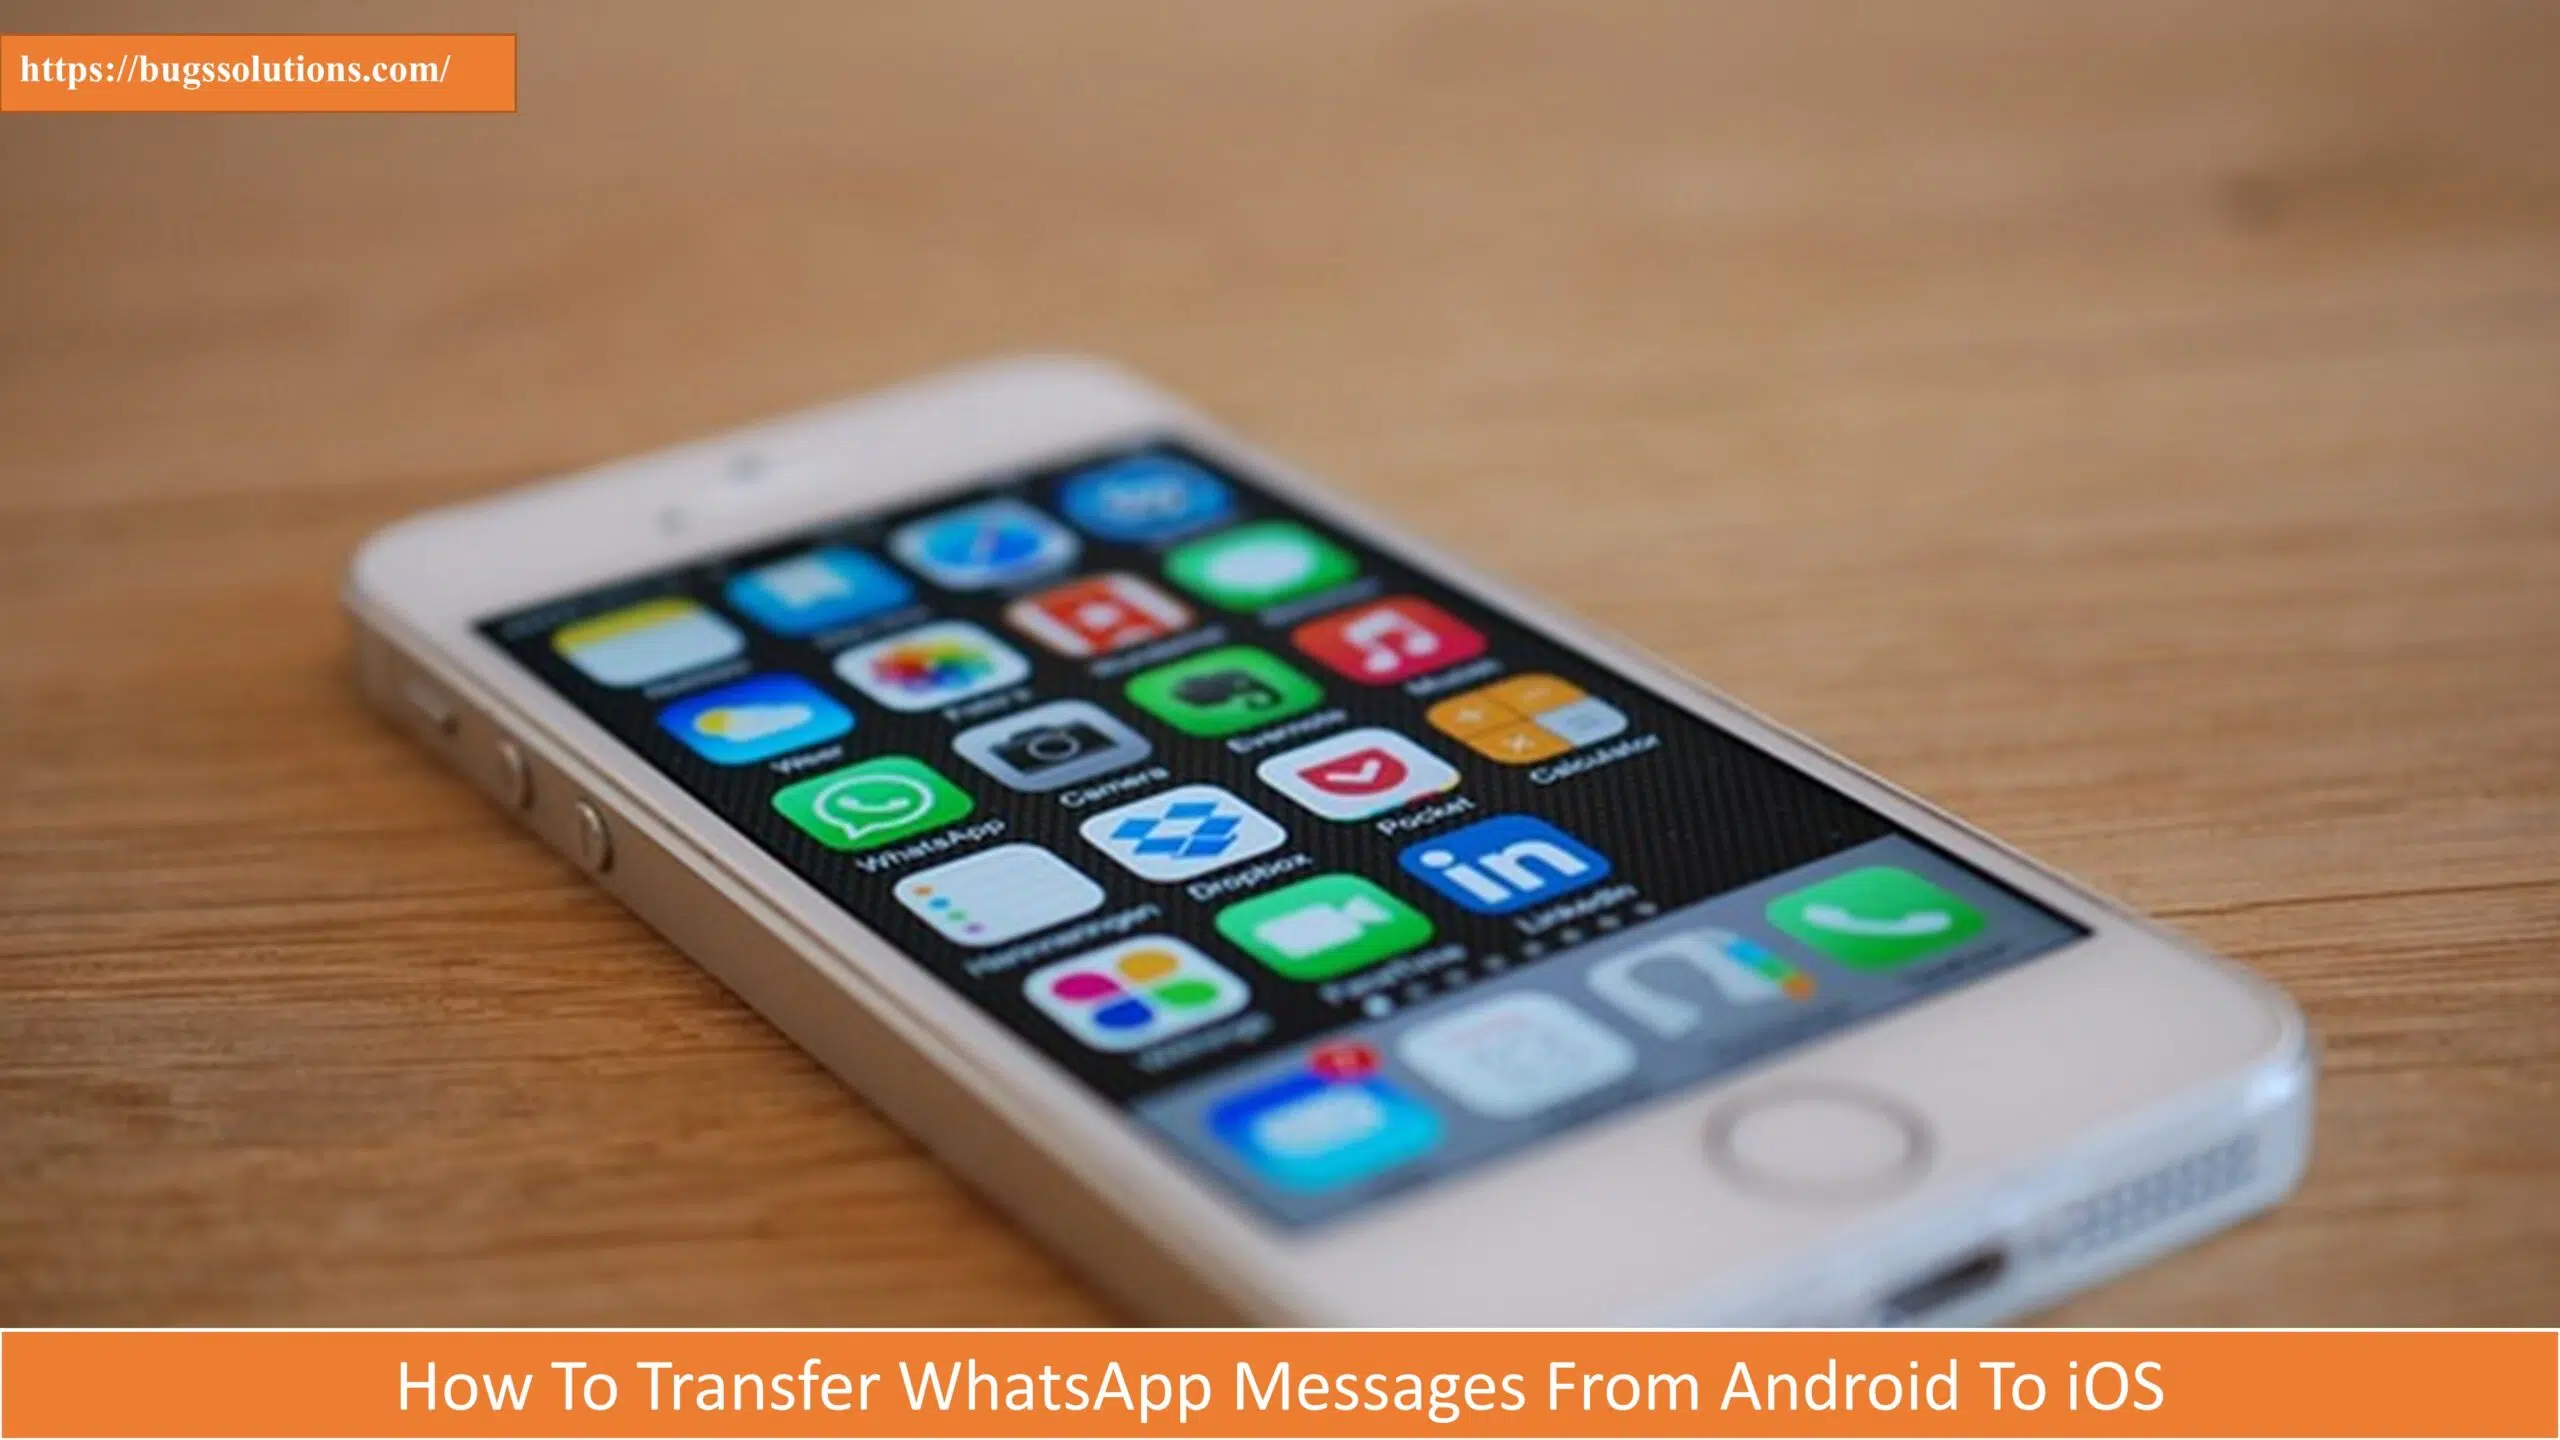 How To Transfer WhatsApp Messages From Android To iOS